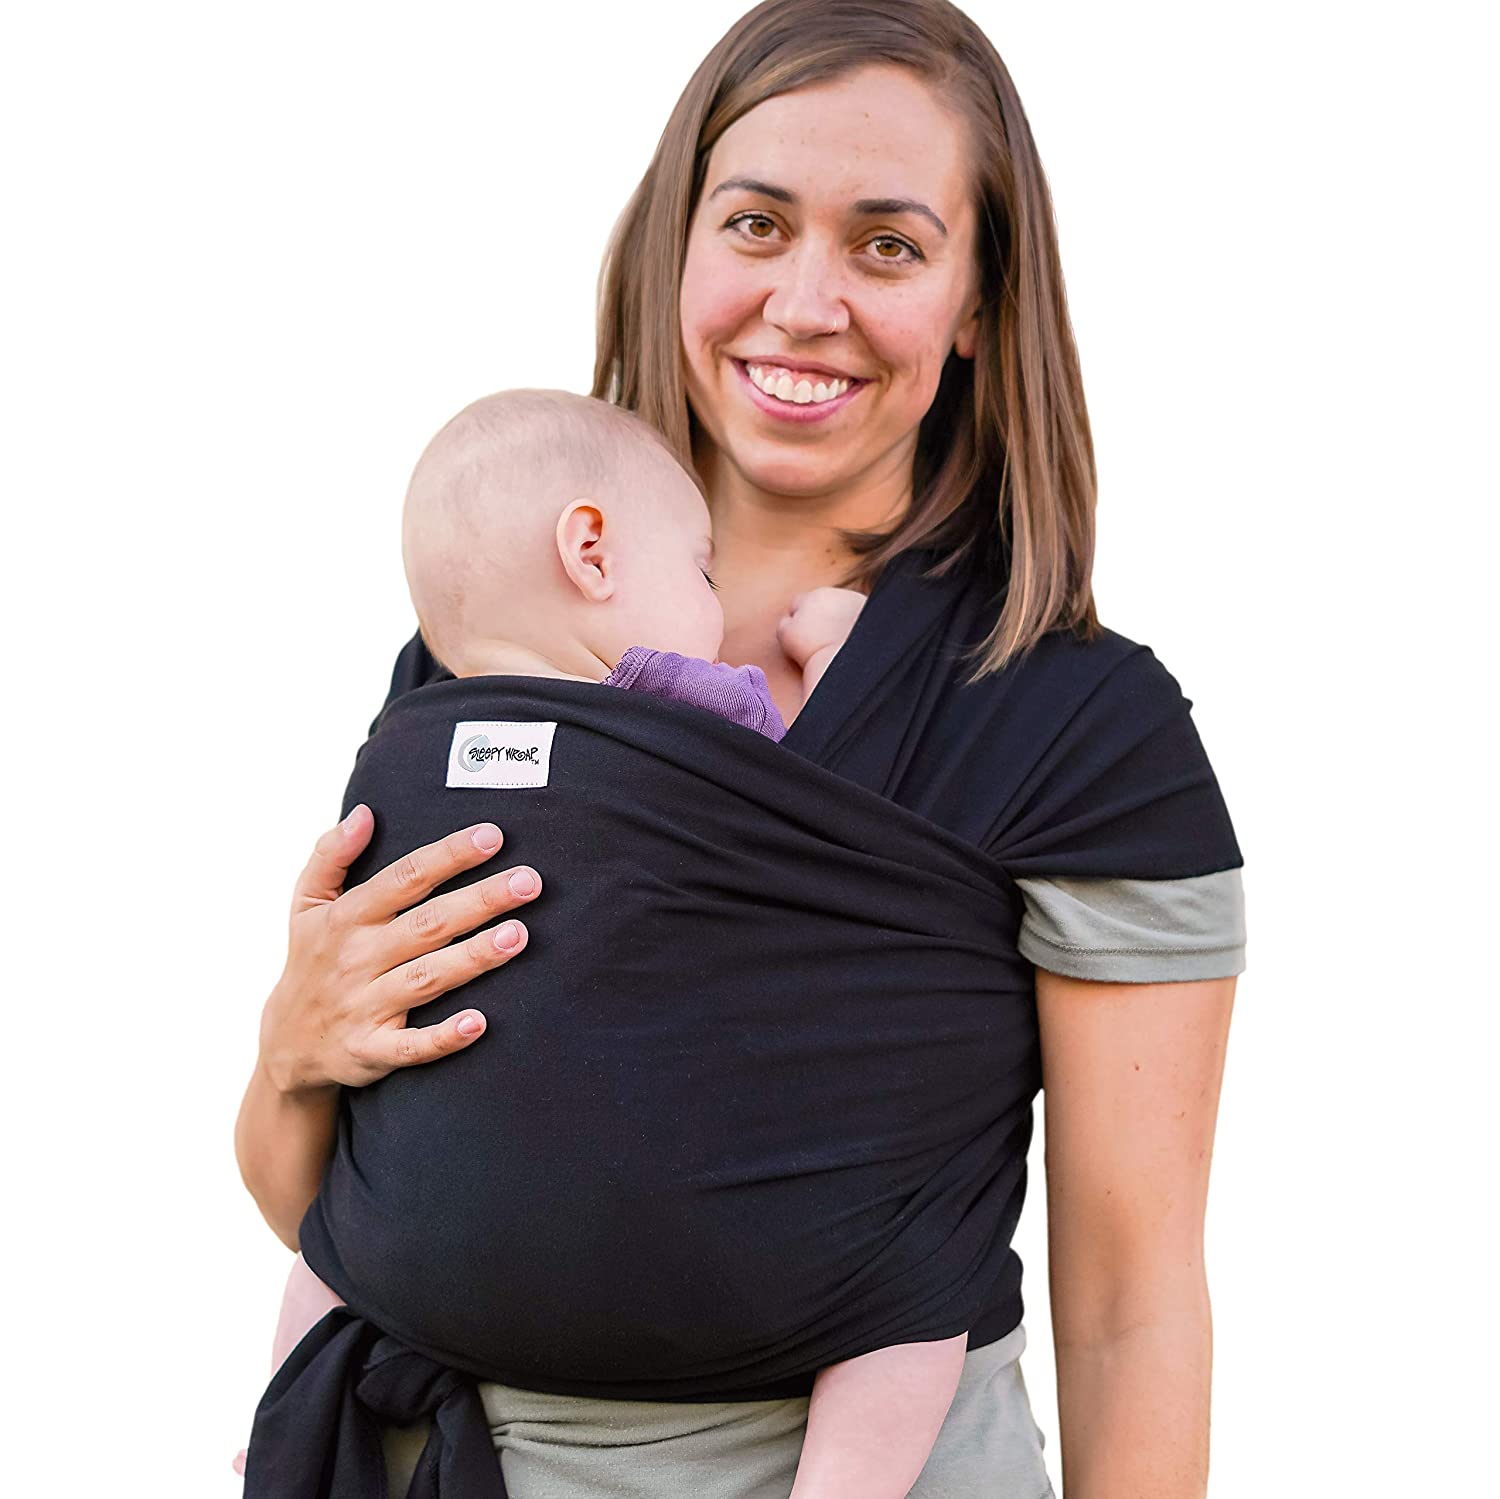 Sleepy Wrap - Black - Comfortable baby carrier made of cotton for newborns up to 35 lbs